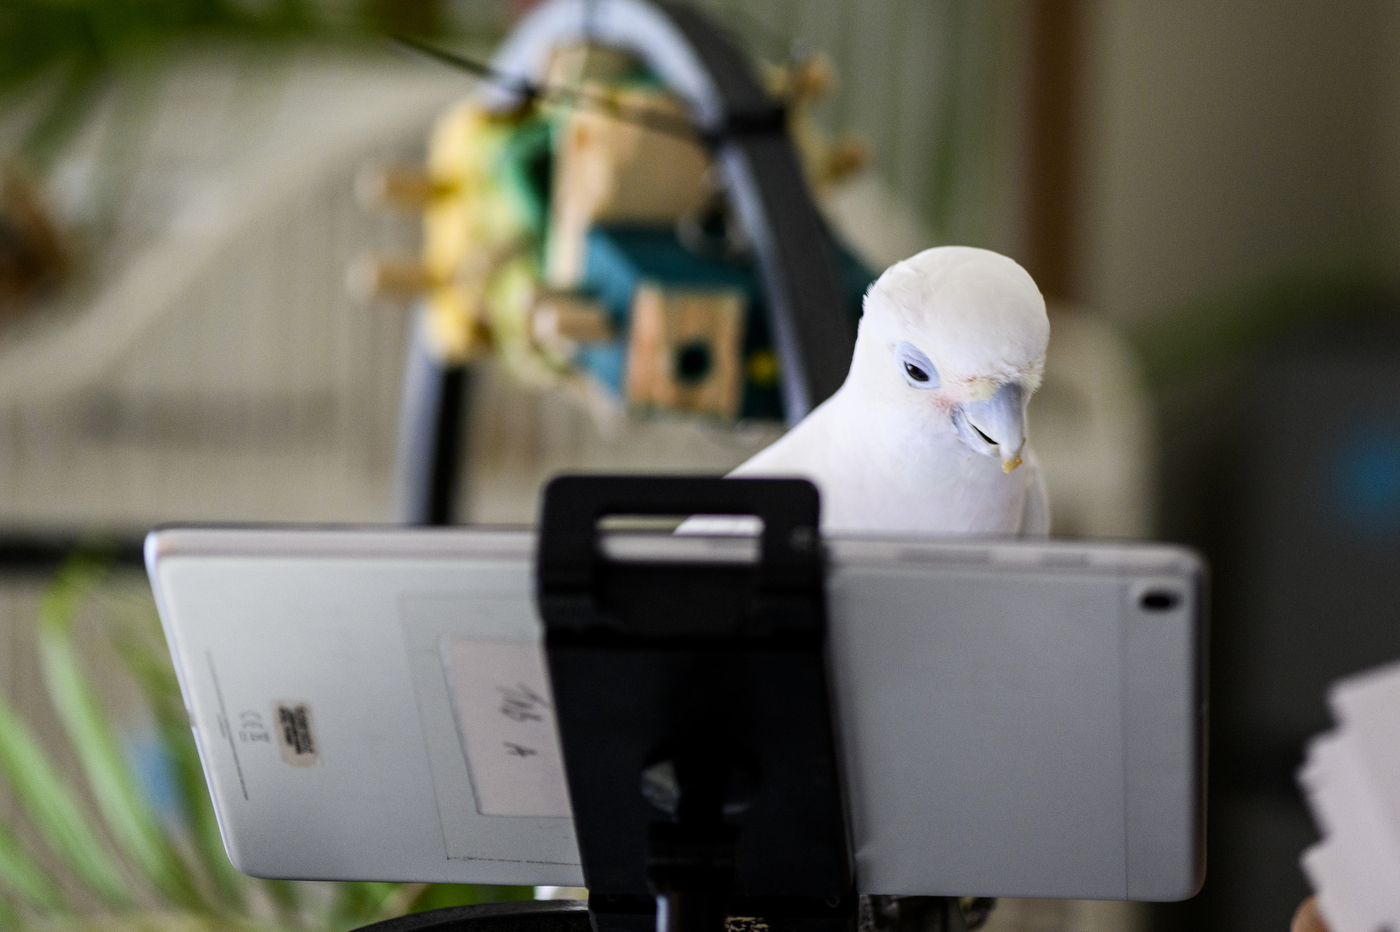 A white parrot uses an iPad to video call another parrot.